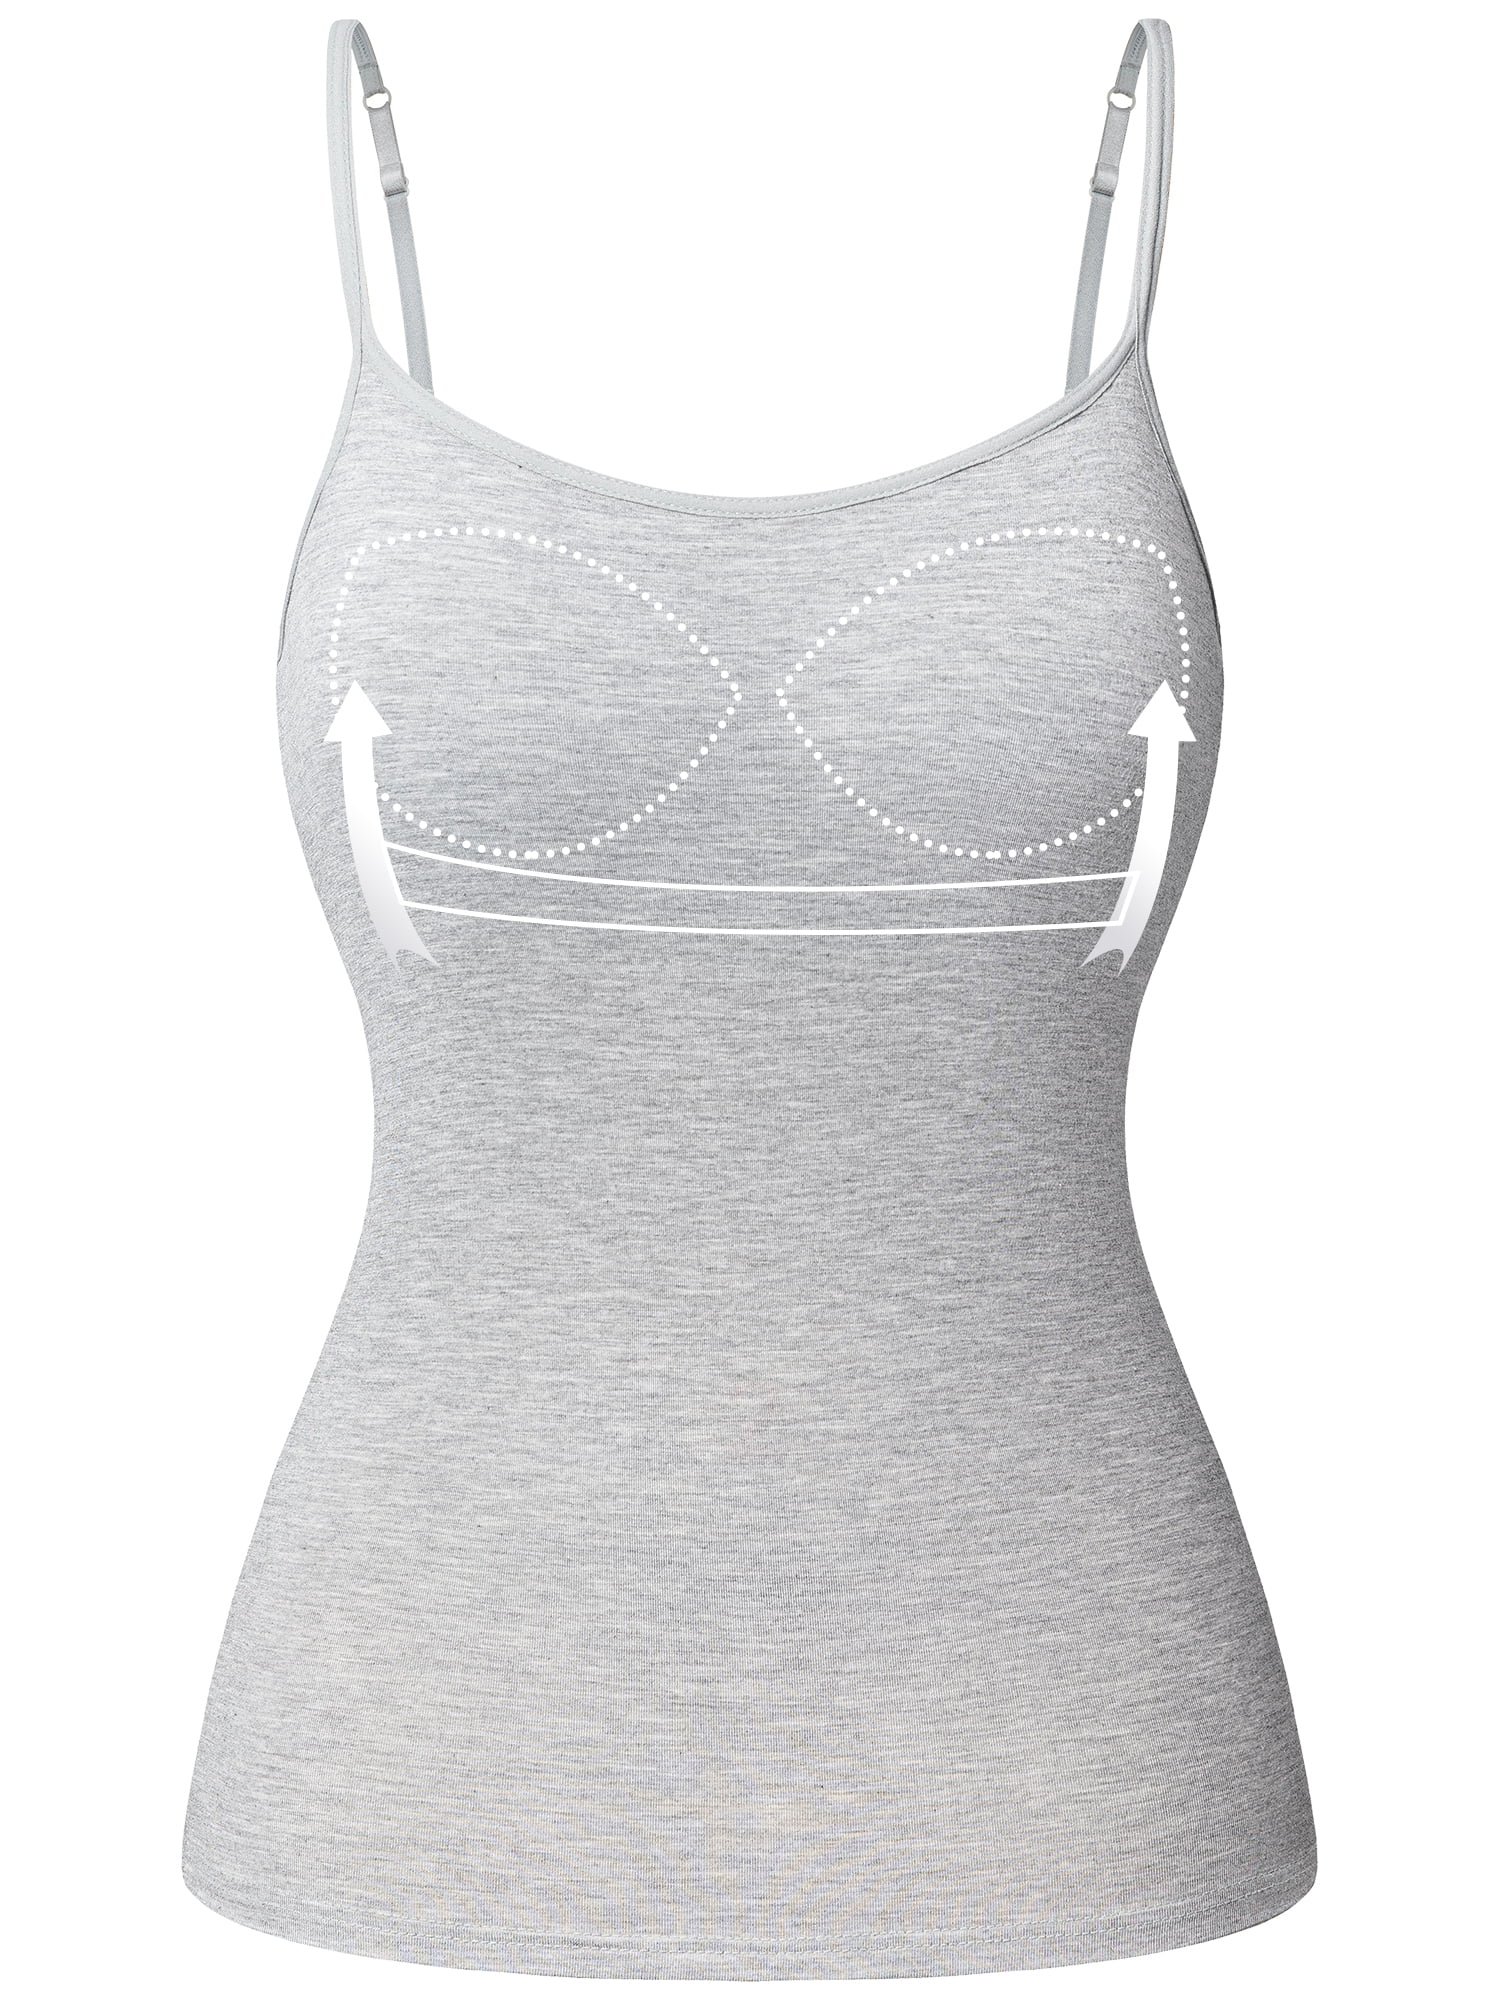 yoga camisole with built in brackets